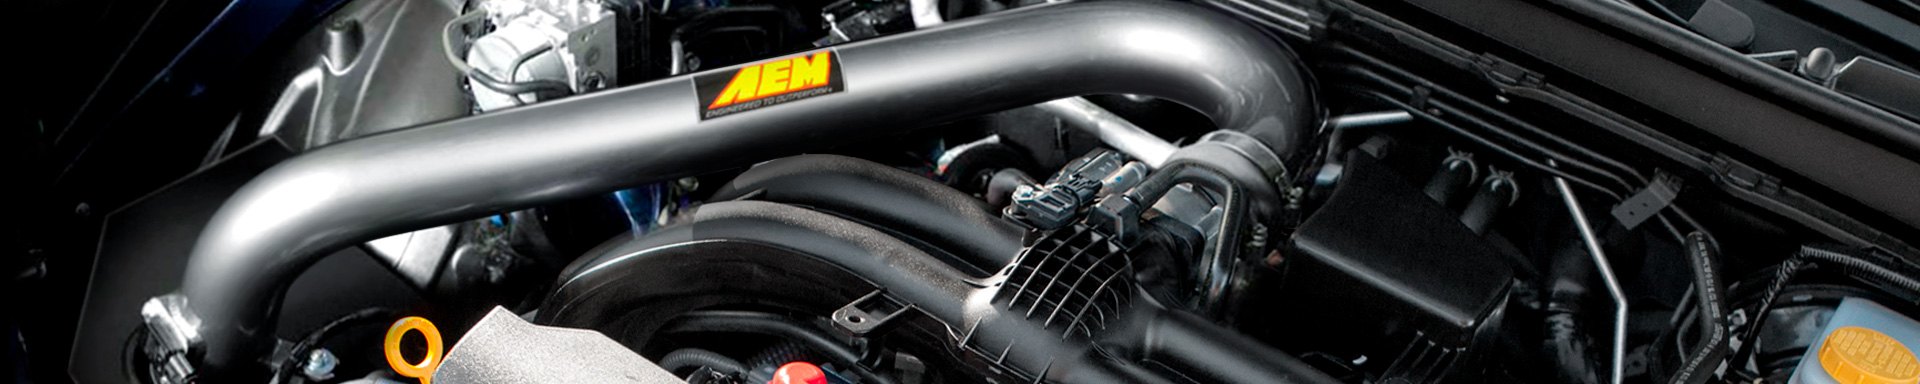 New Line Of AEM Air Intakes for Subaru Legacy & Forester